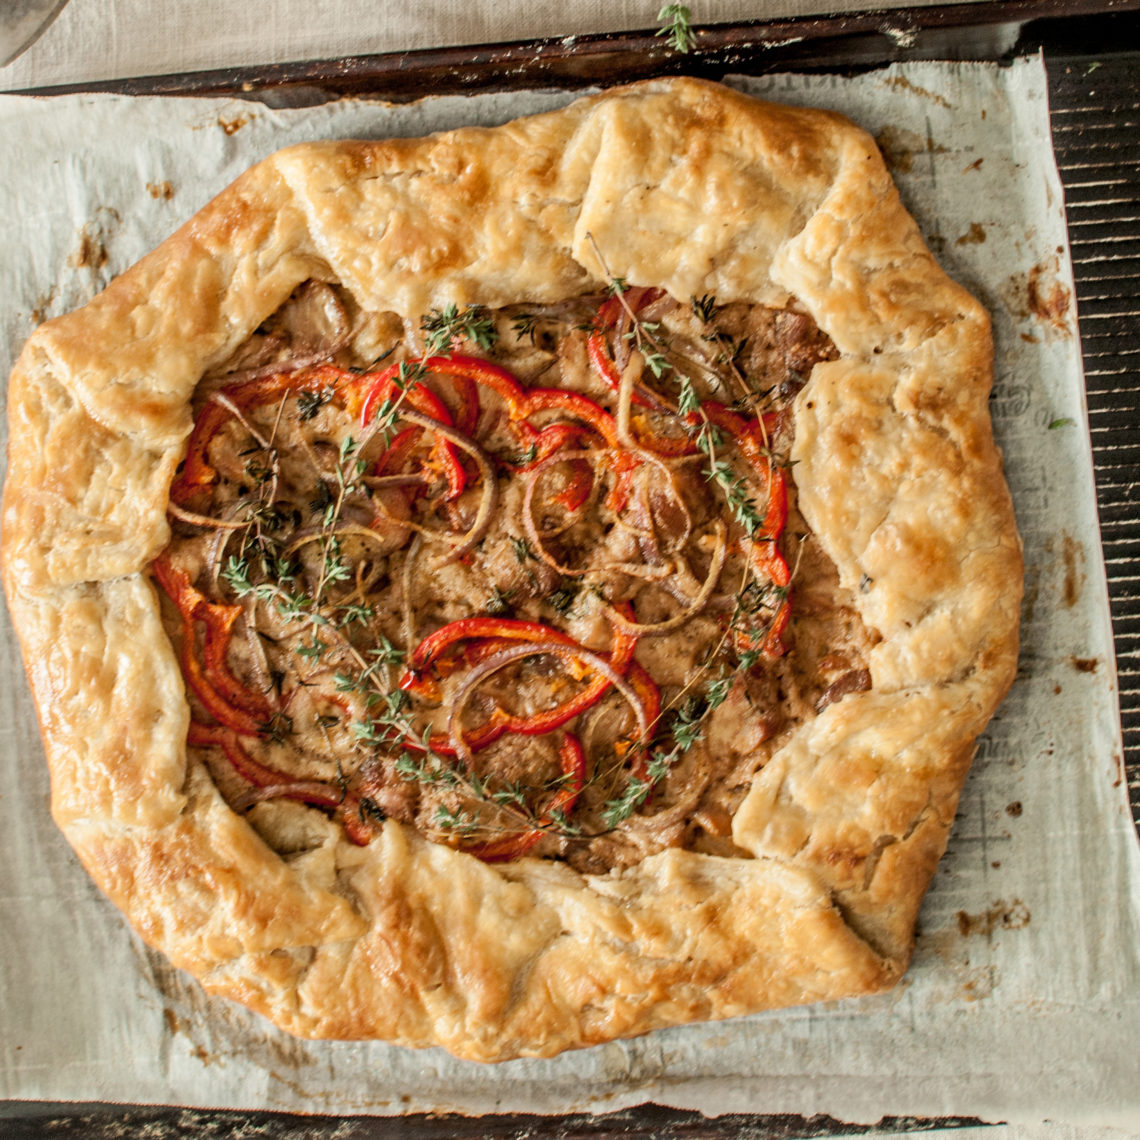 A Recipe for a Rustic Galette with a Creamy savory chicken filling! It's a wonderful alternative to the classic Chicken Pot Pie. It's surprisingly easy to make, and the fresh herbs give it such a full flavor! The all butter crust is a wonderful farmhouse staple of my kitchen, too!